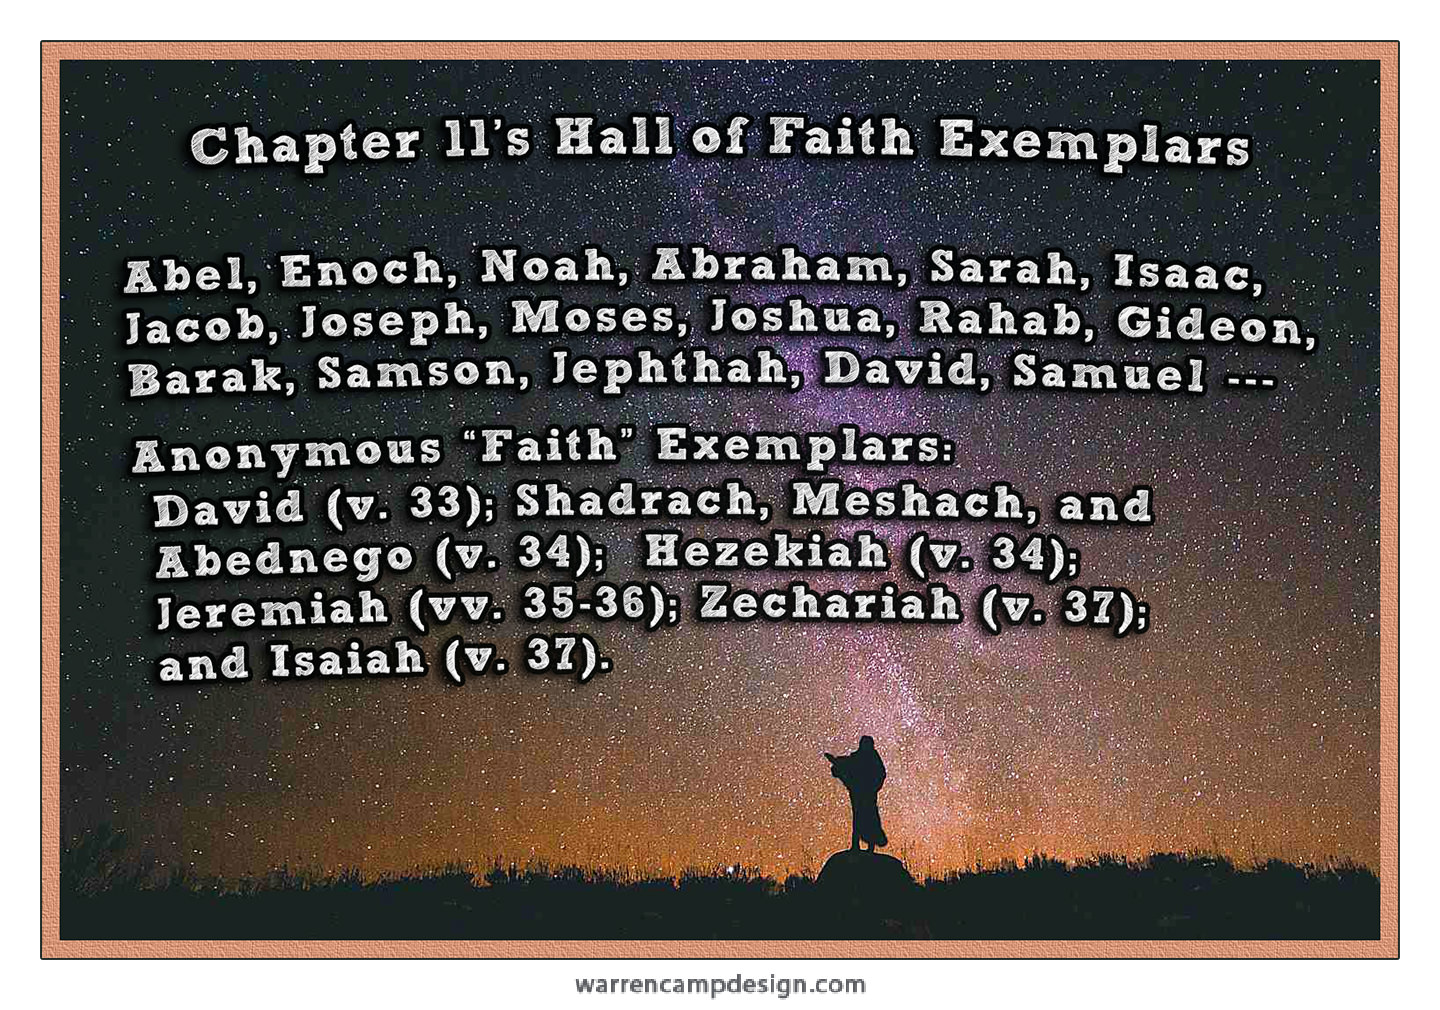 Scripture picture of all those inducted into chapter 11's 'Hall of Faith'